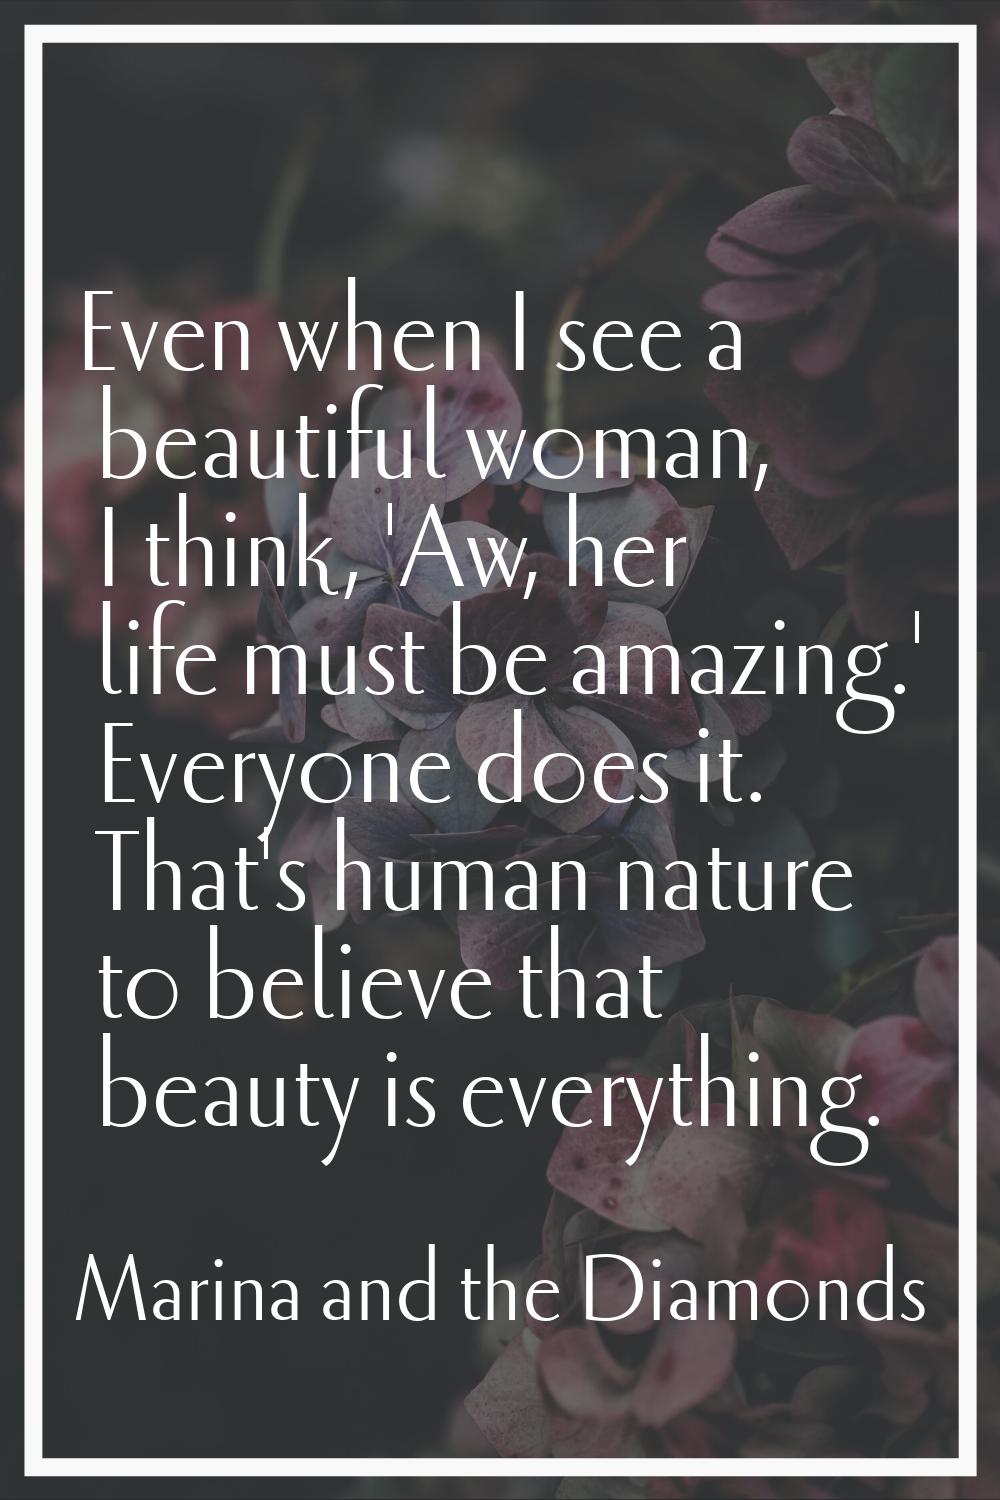 Even when I see a beautiful woman, I think, 'Aw, her life must be amazing.' Everyone does it. That'